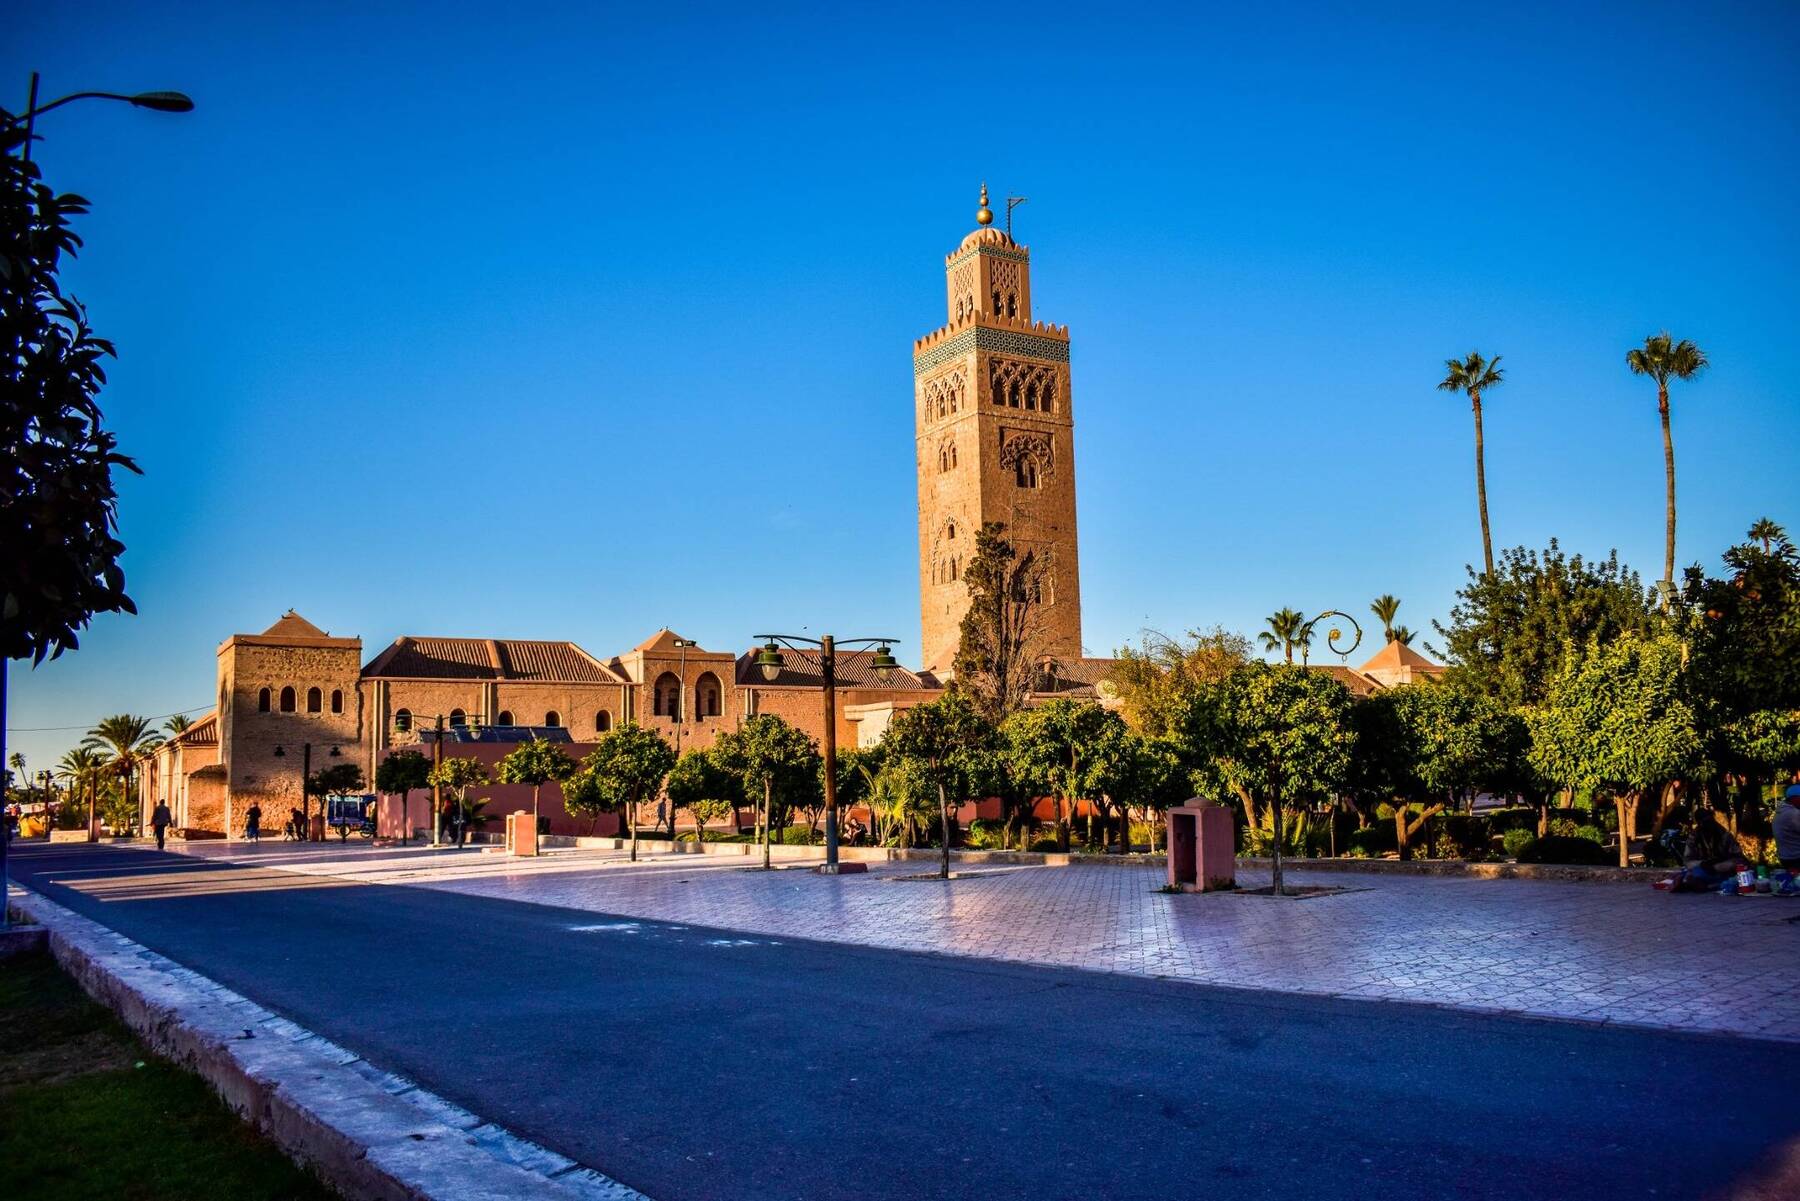 How to Spend 72 Hours in Marrakech